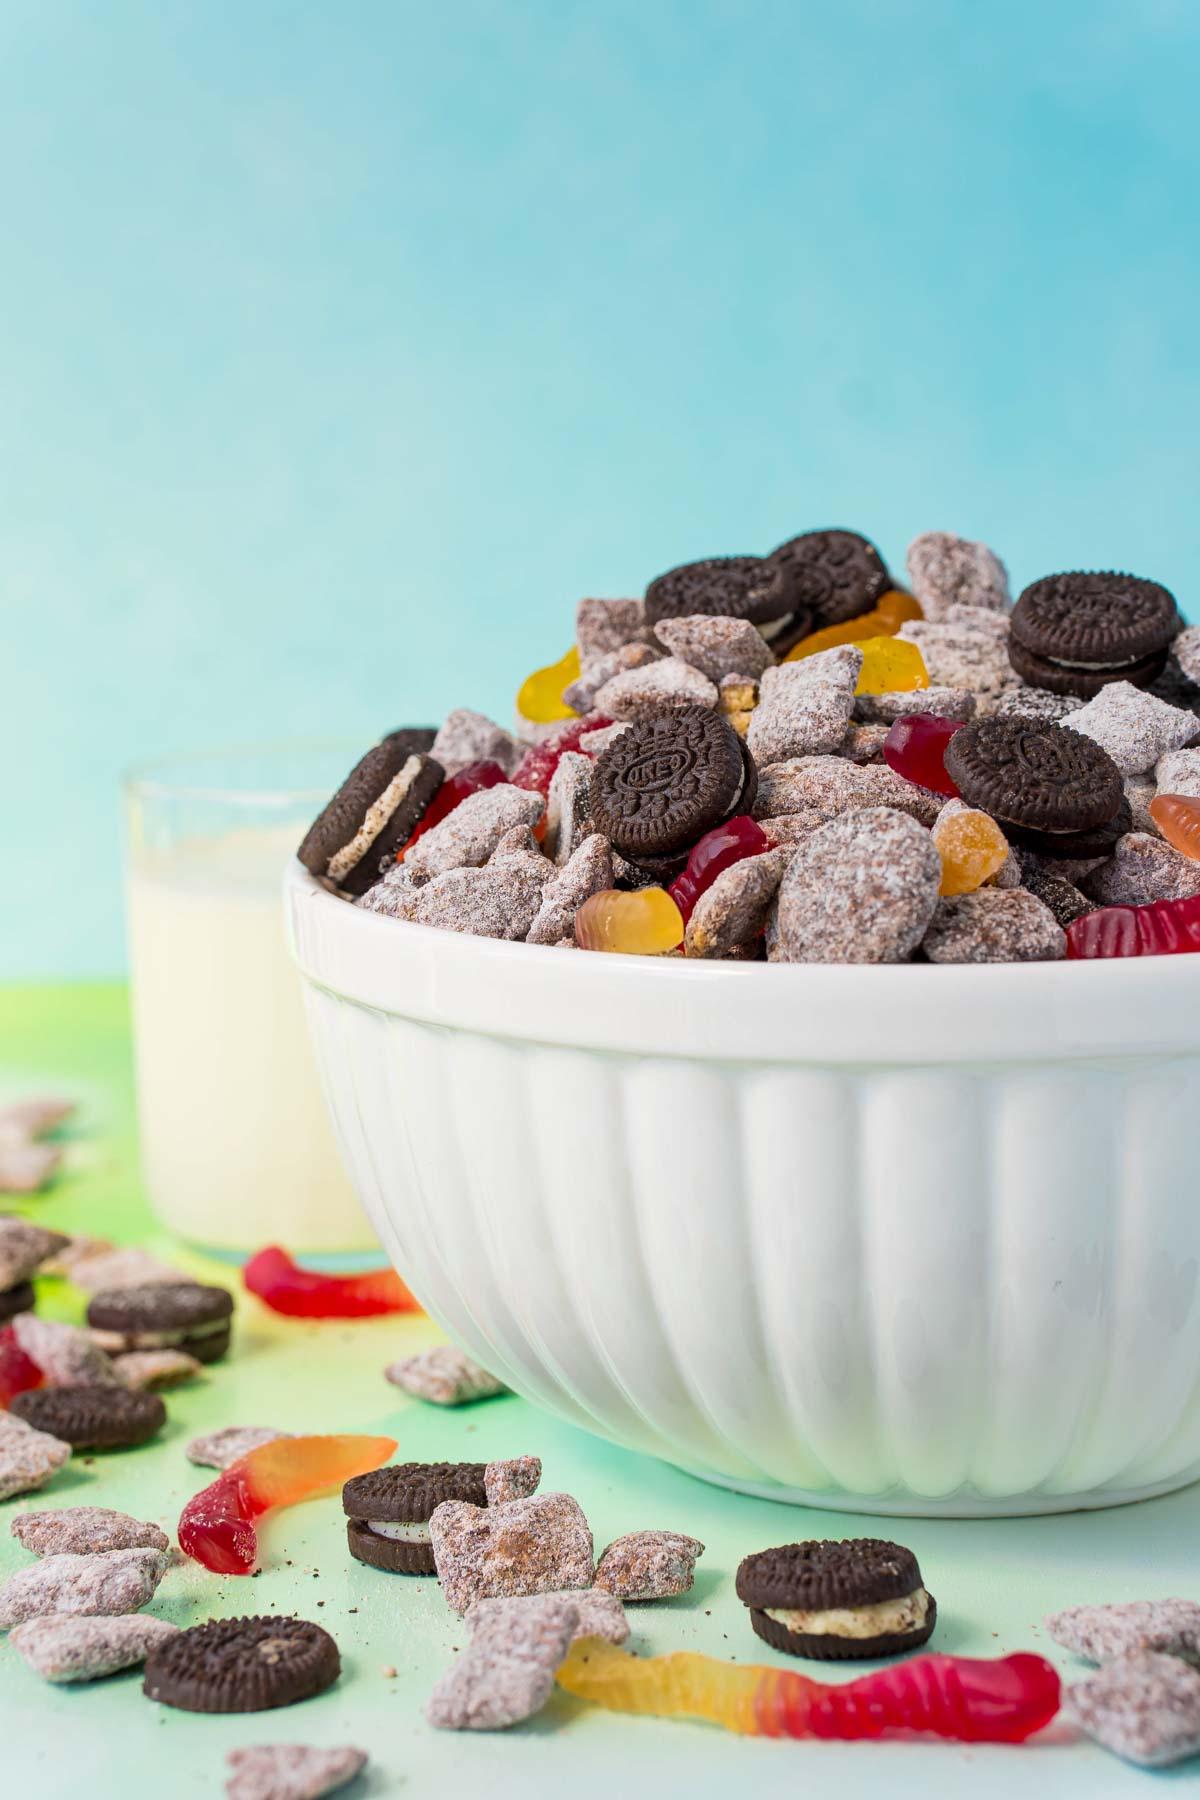 Oreo muddy buddies with gummy worms in a glass bowl